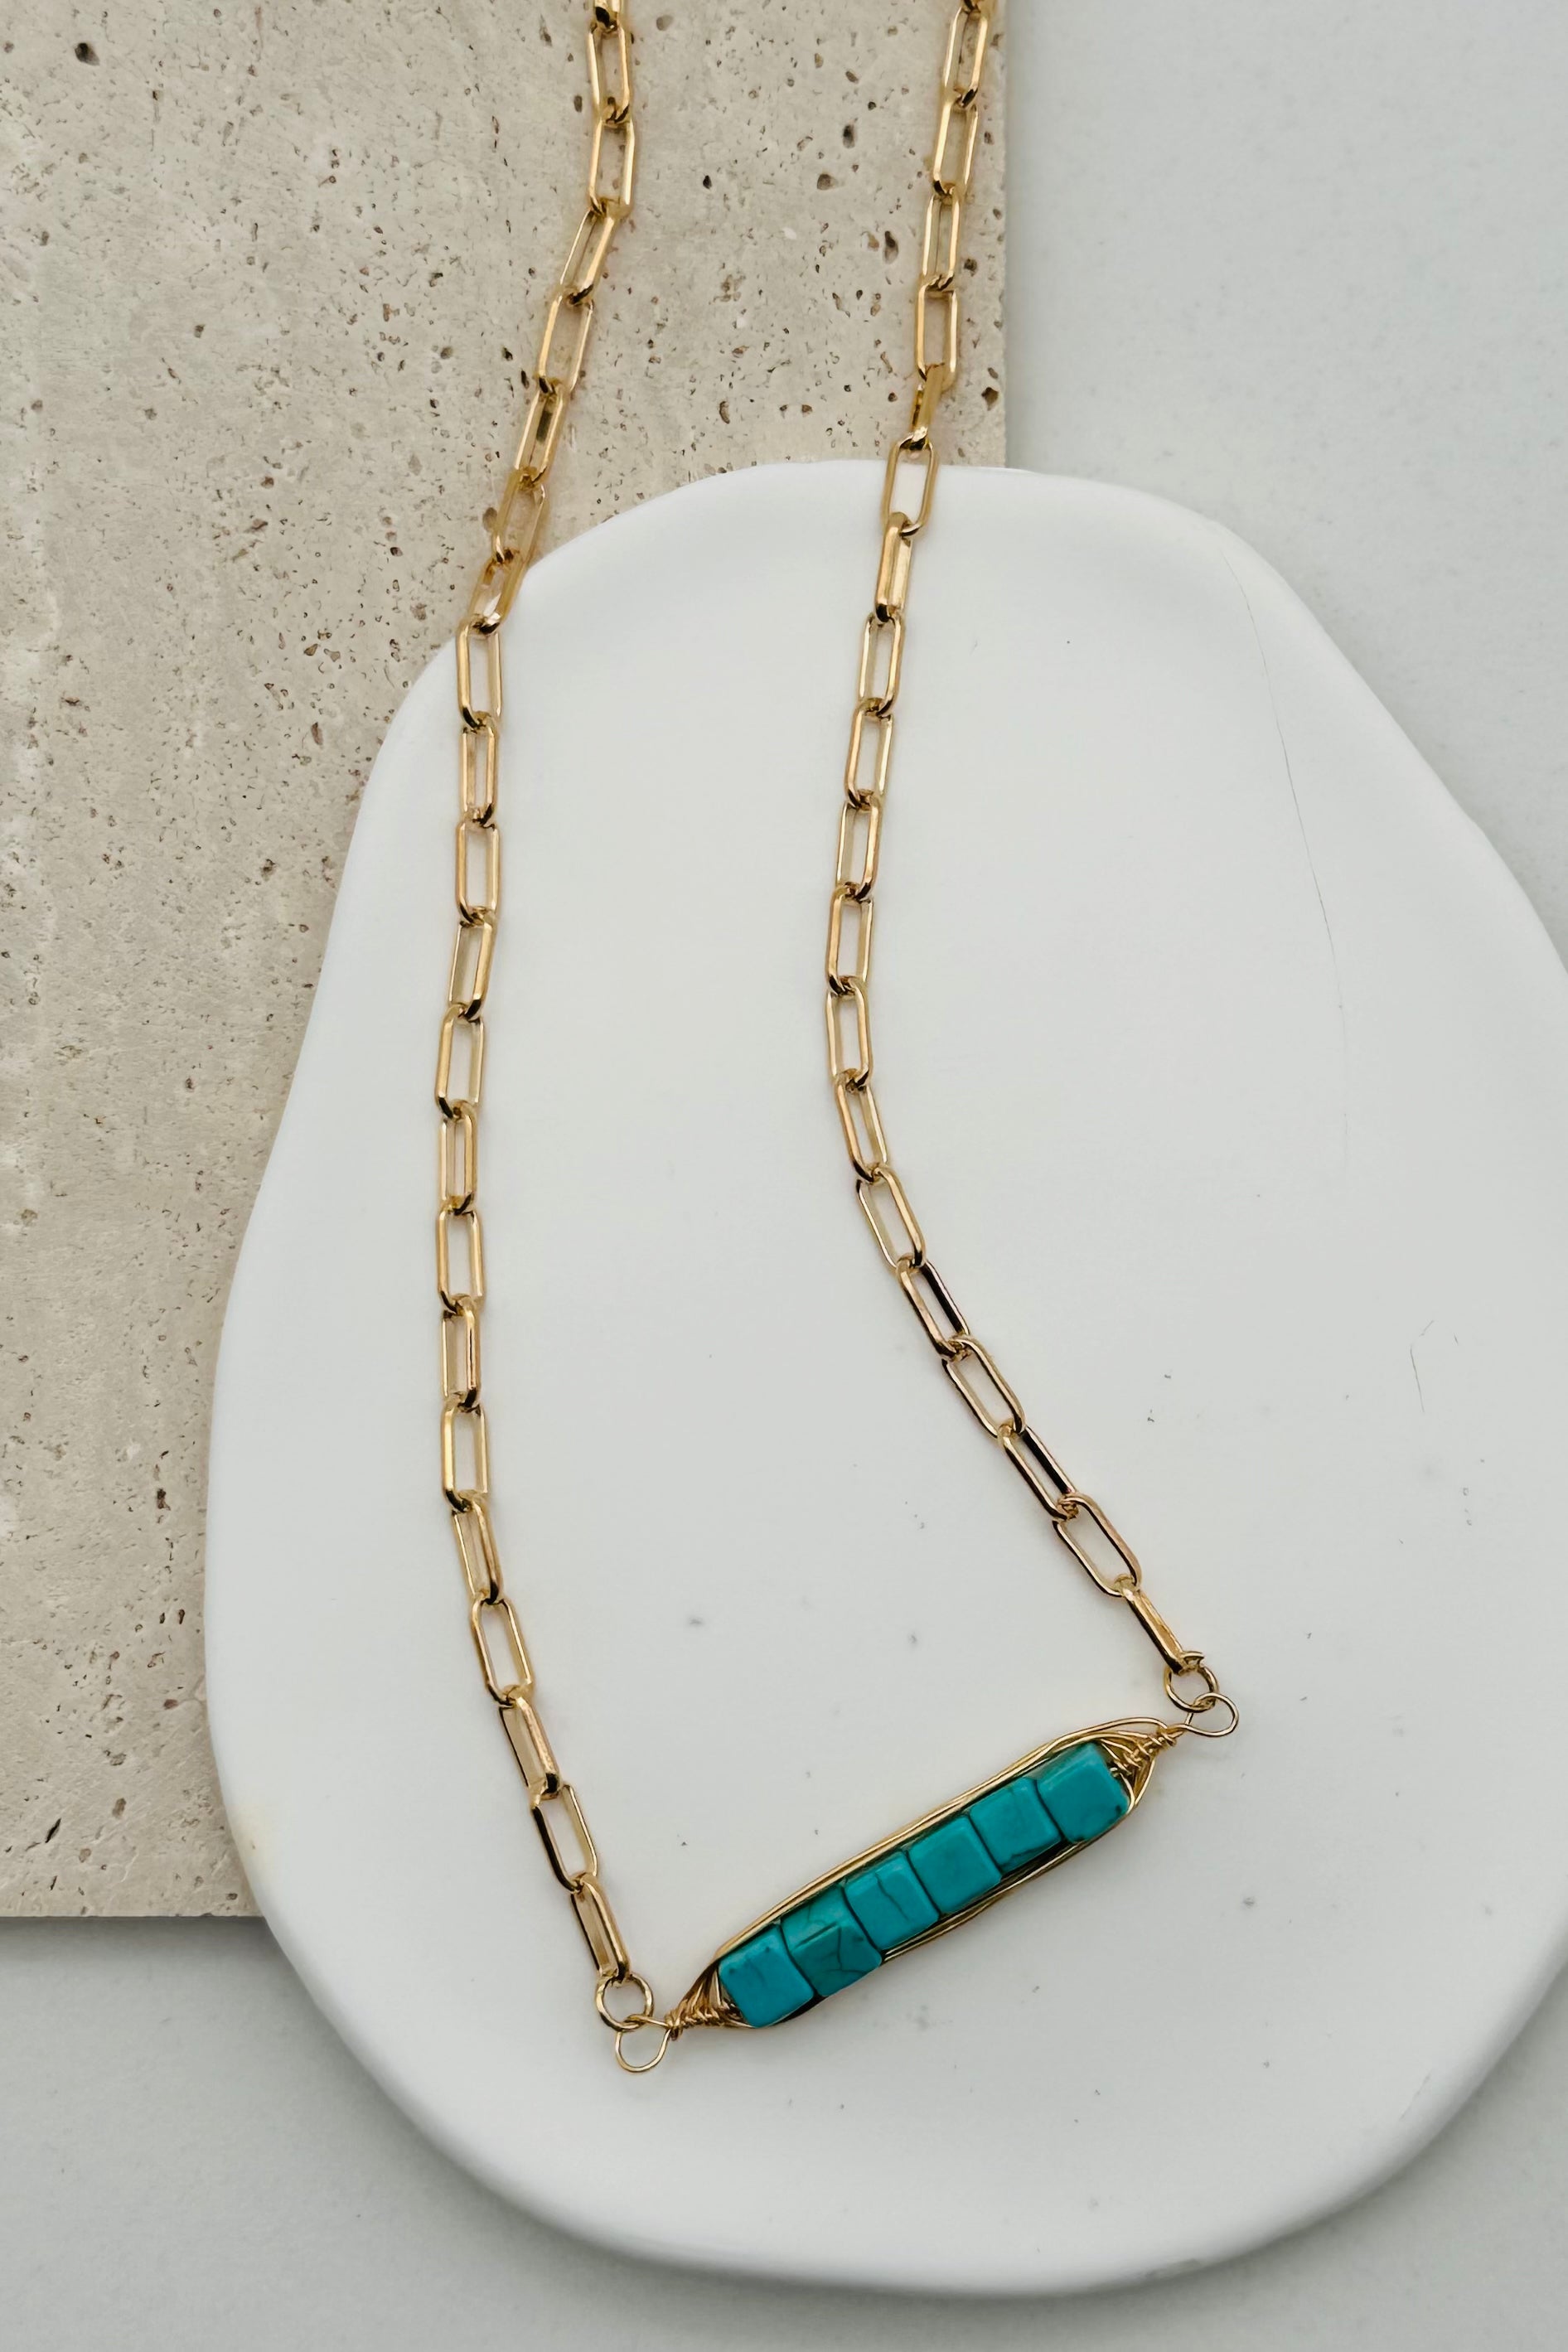 Peas in a Pod Turquoise Necklace